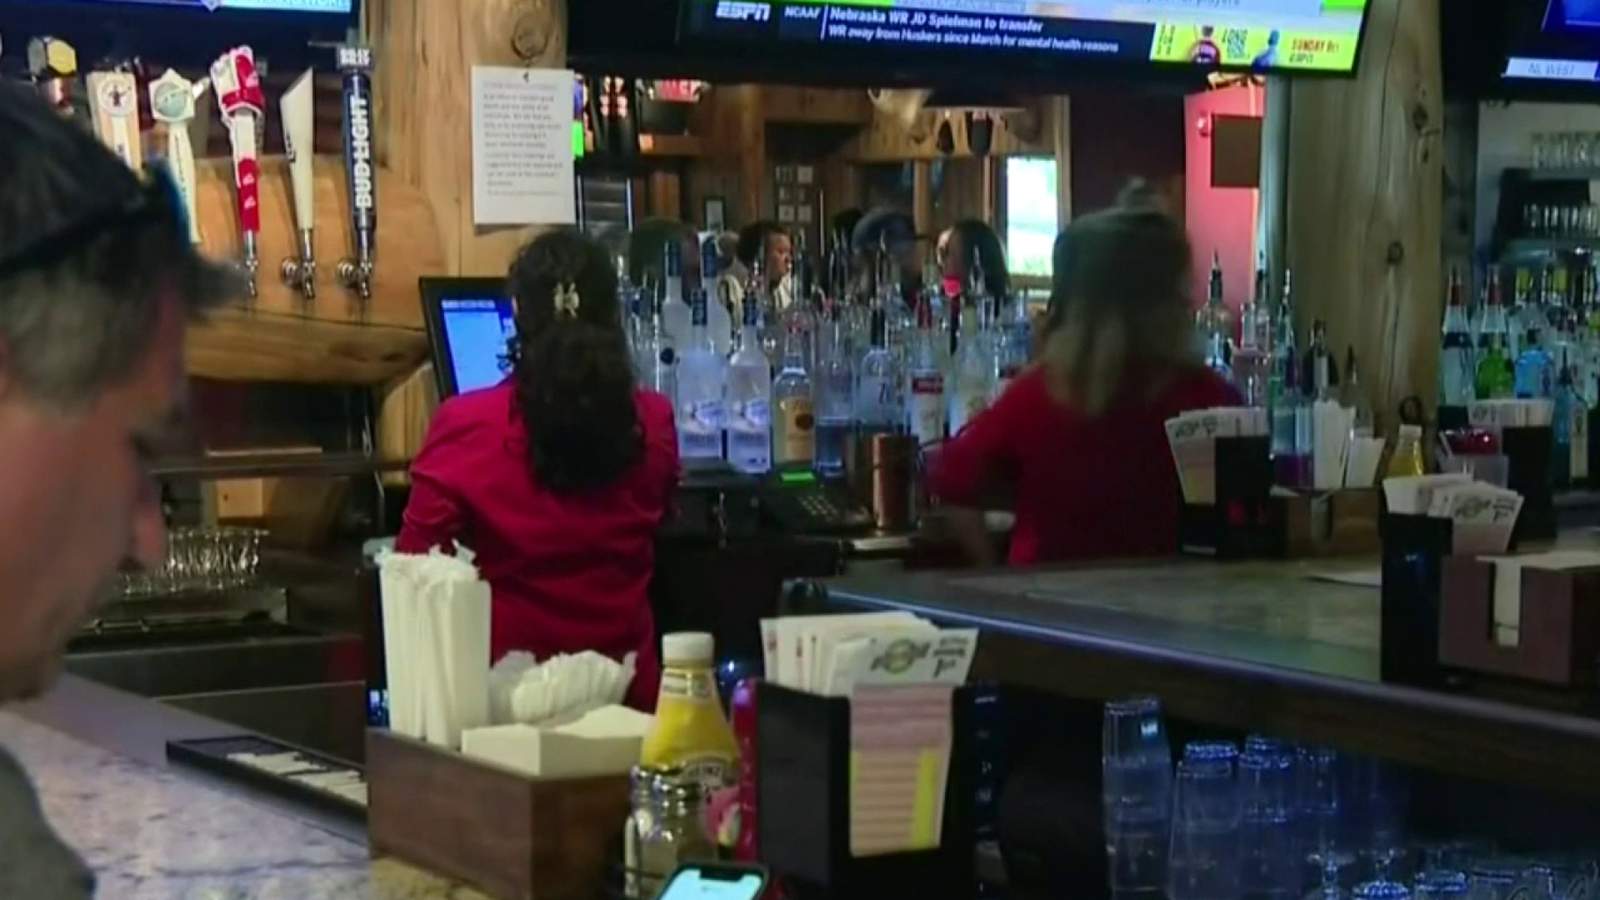 New bill would allow Michigan bars to stay open until 4 a.m.